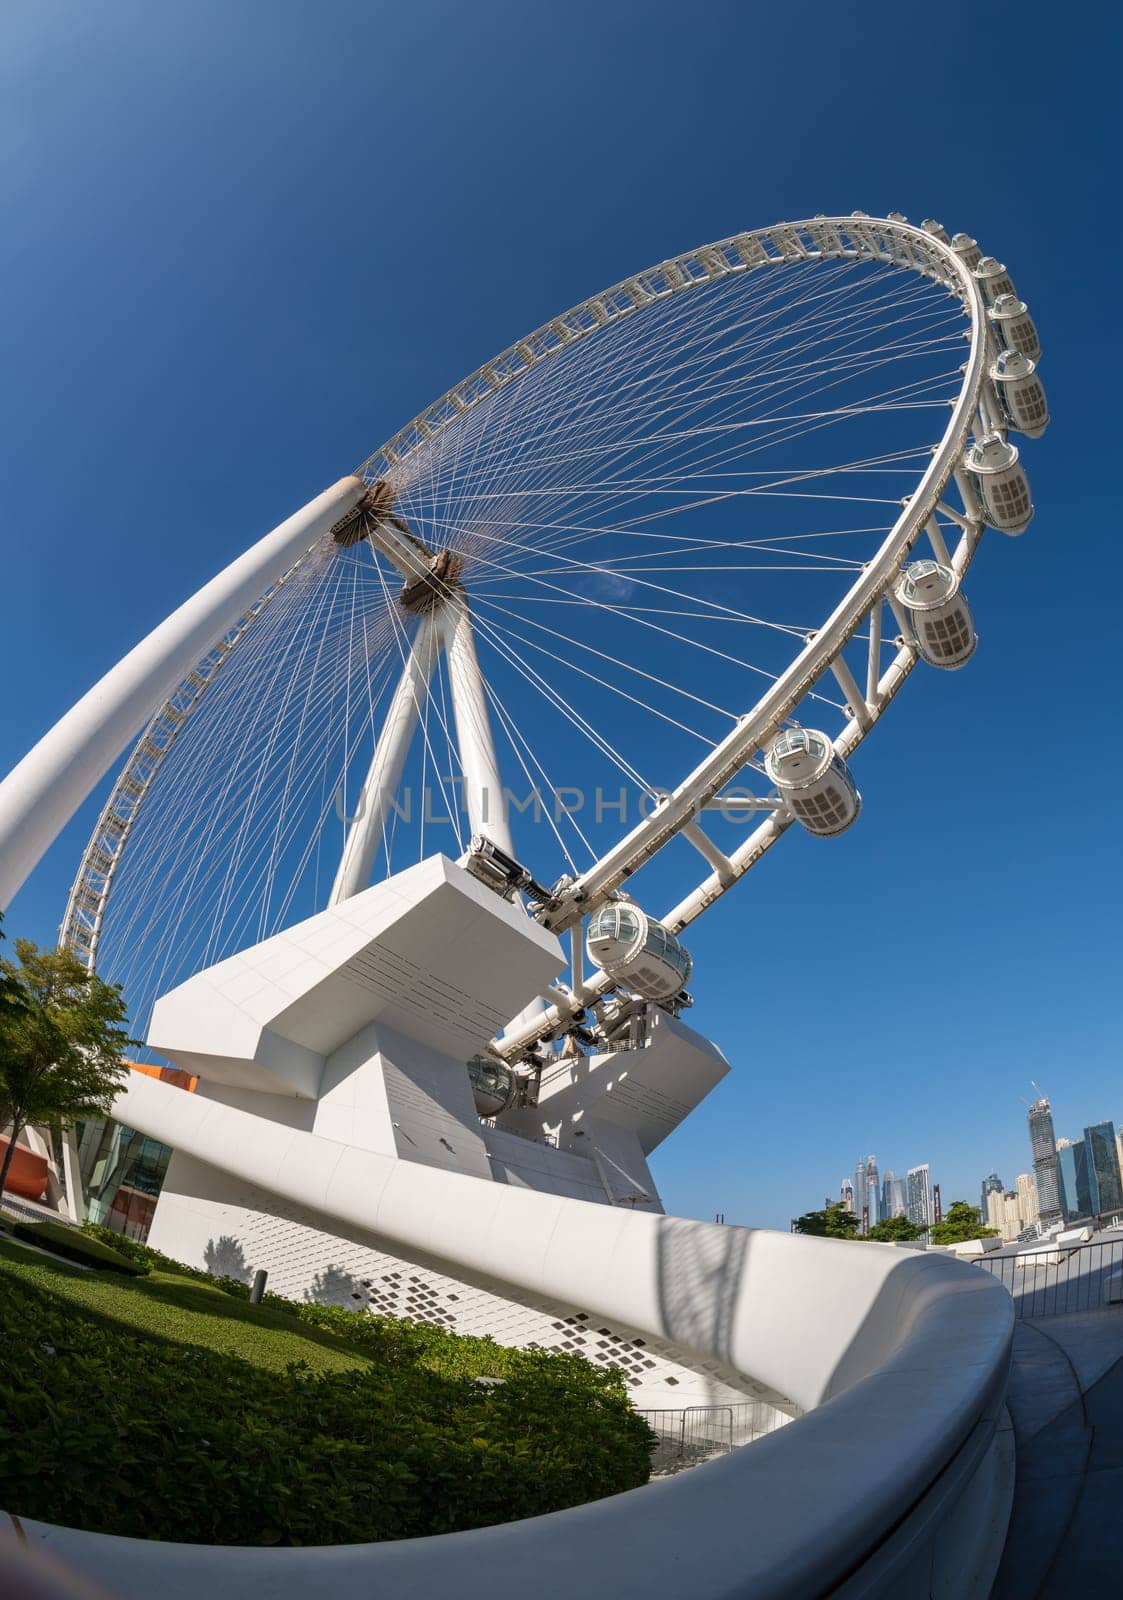 Looking up with fish eye lens at Ain Dubai Observation Wheel on BlueWaters Island with JBR Beach in background